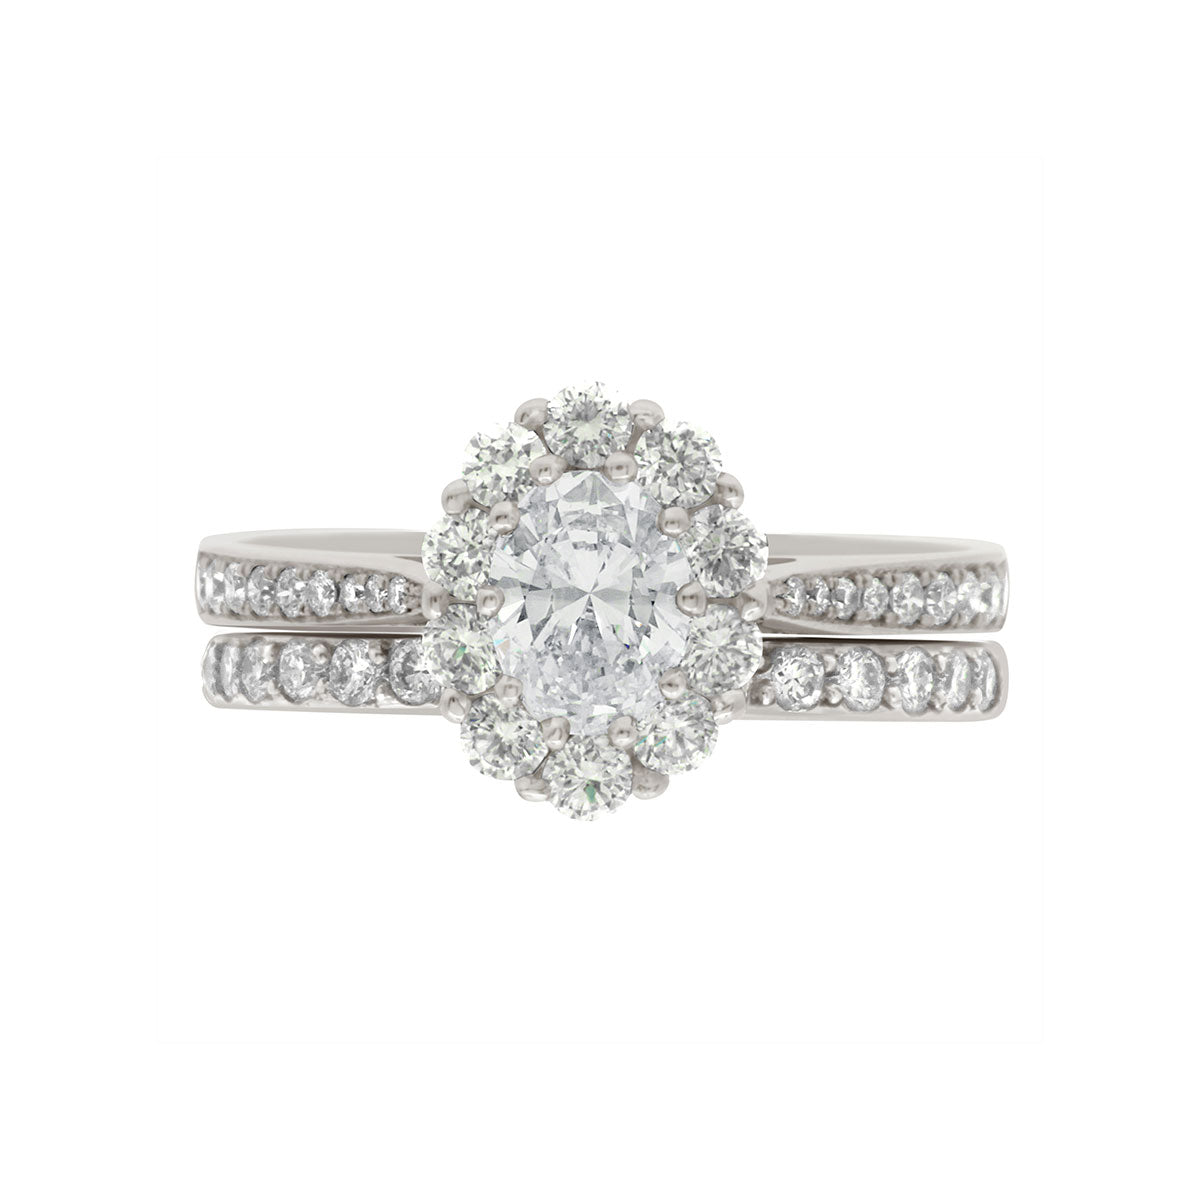 Cluster Engagement Ring with diamond shoulders in white gold with a matching diamond set wedding ring